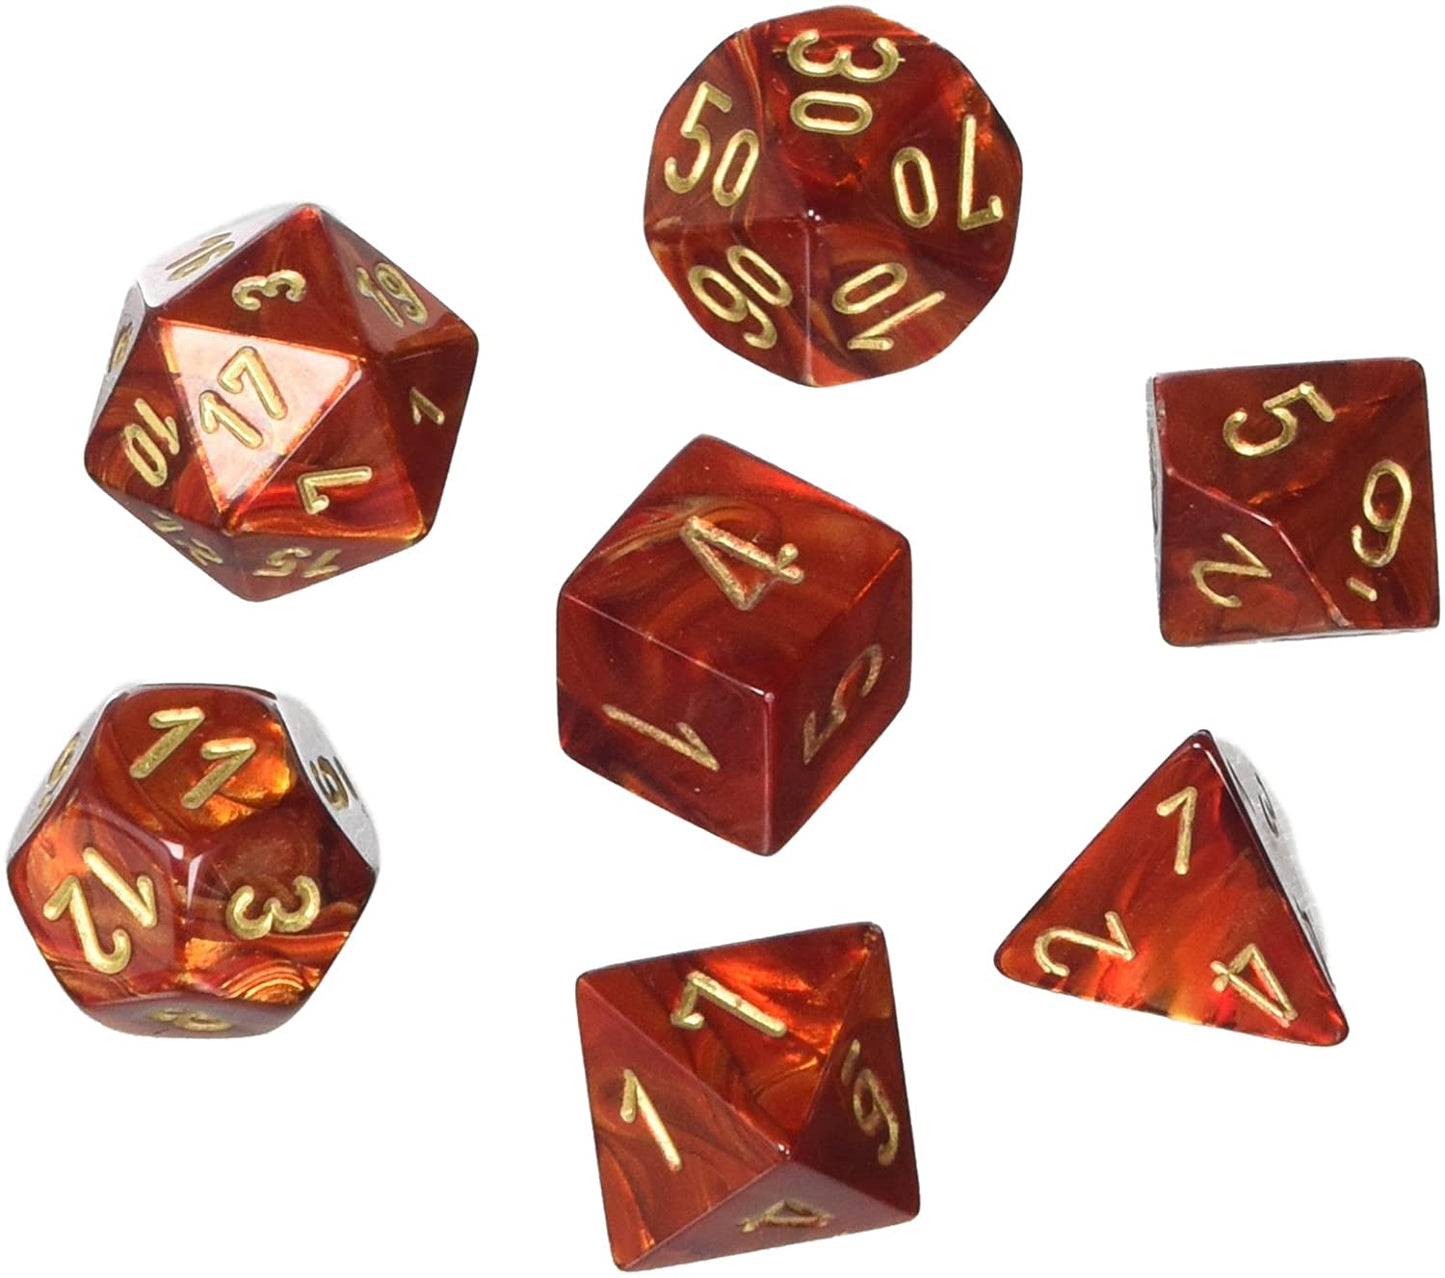 Chessex Dice: 7 Die Set - Scarab - Scarlet with Gold (CHX 27414) - Gamescape